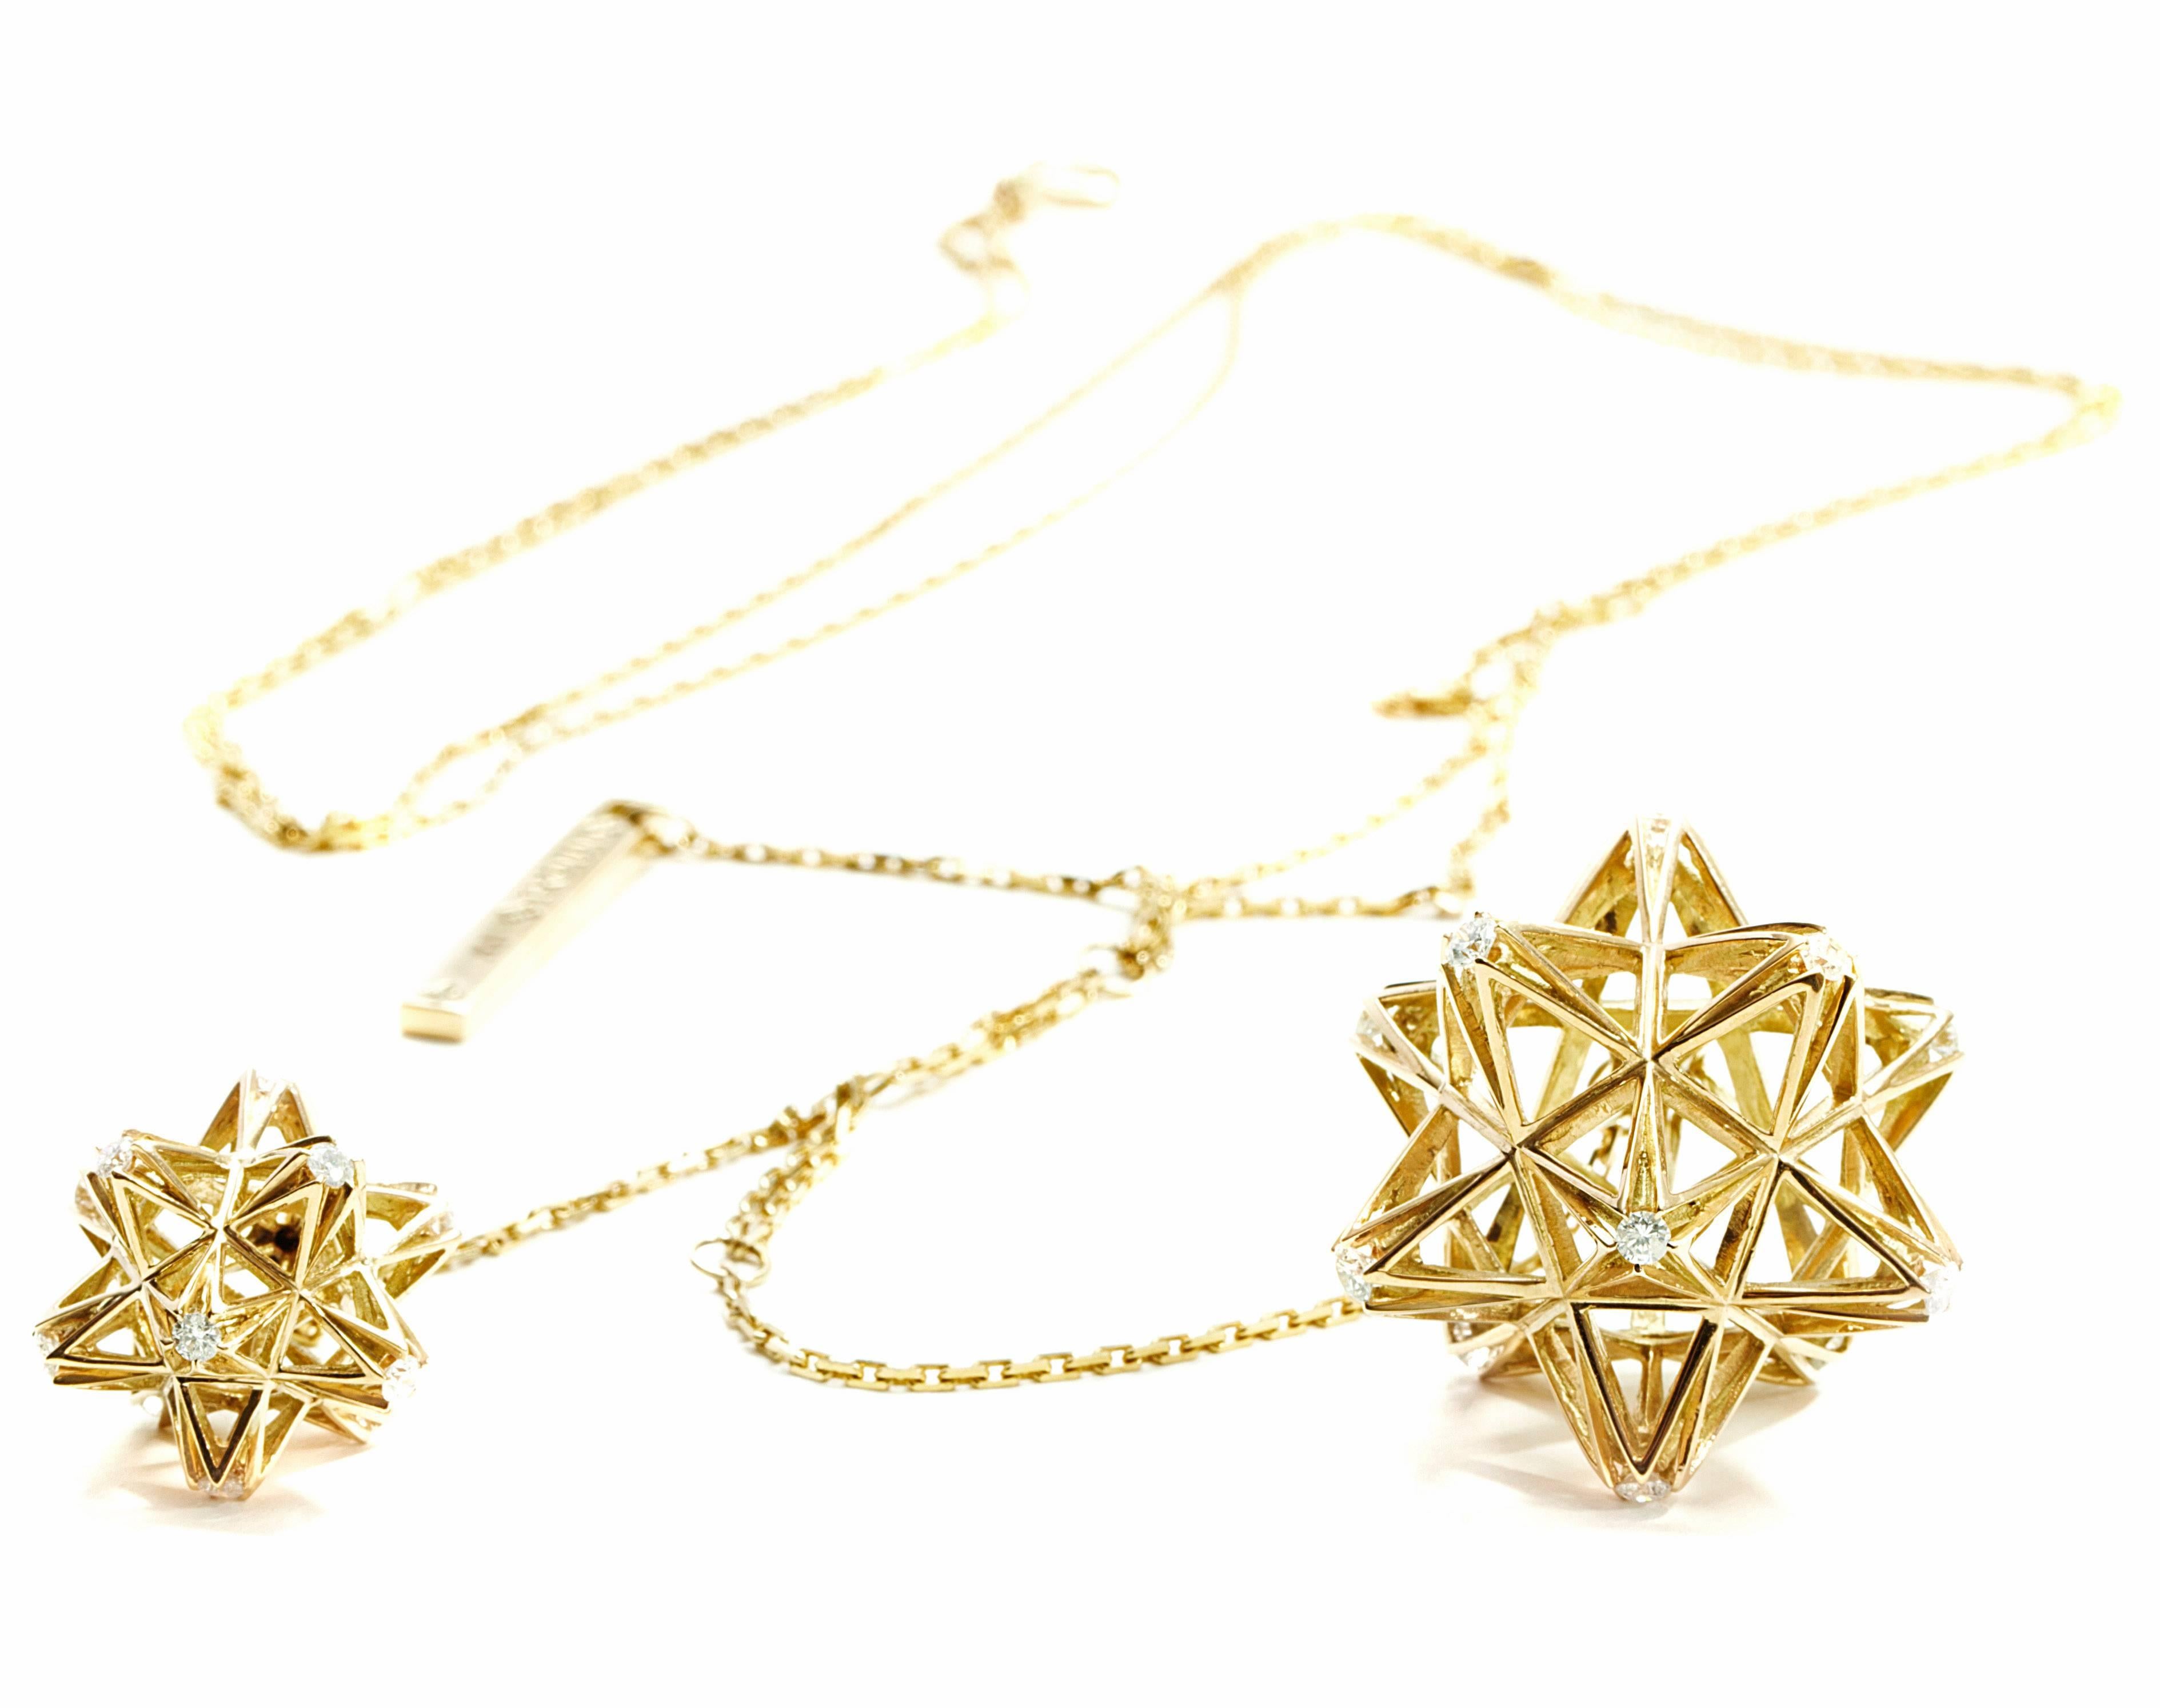 This limited edition Frame Diamond and 18K Gold Pendant Necklace sparkles with strength. This star dedecahedron is a powerful geometric shape. It is inspired by sacred geometry and was created to provide a powerful force for your journey through